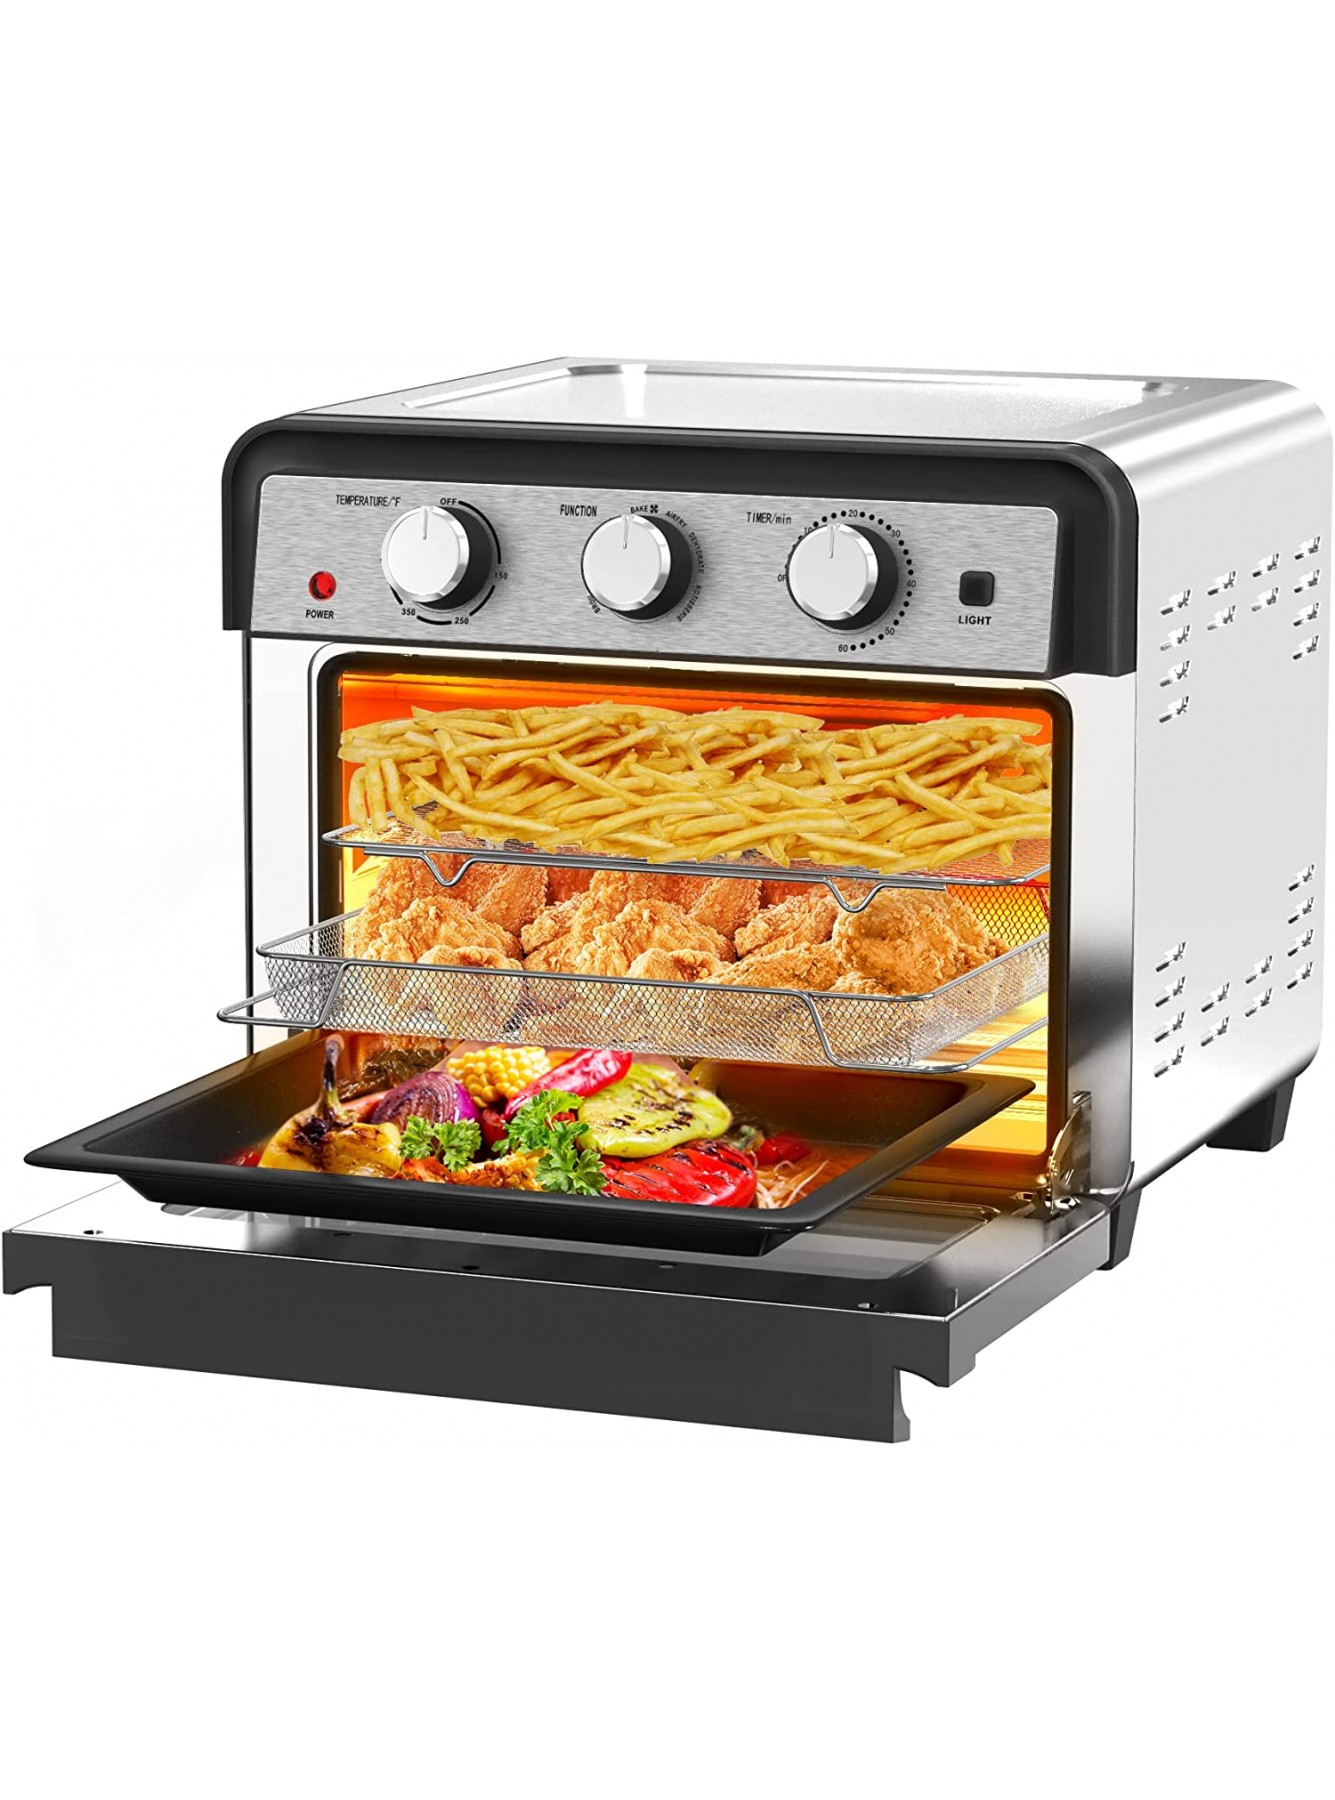 SKANWEN Air Fryer Oven 7-in-1 24 Quart Extra Large Convection Countertop Oven 6 Slice Toaster Oven Rotisserie & Dehydrator Fry Roast Broil Bake Dehydrate Reheat 8 Accessories Recipes. 1700W B095LQF4SN